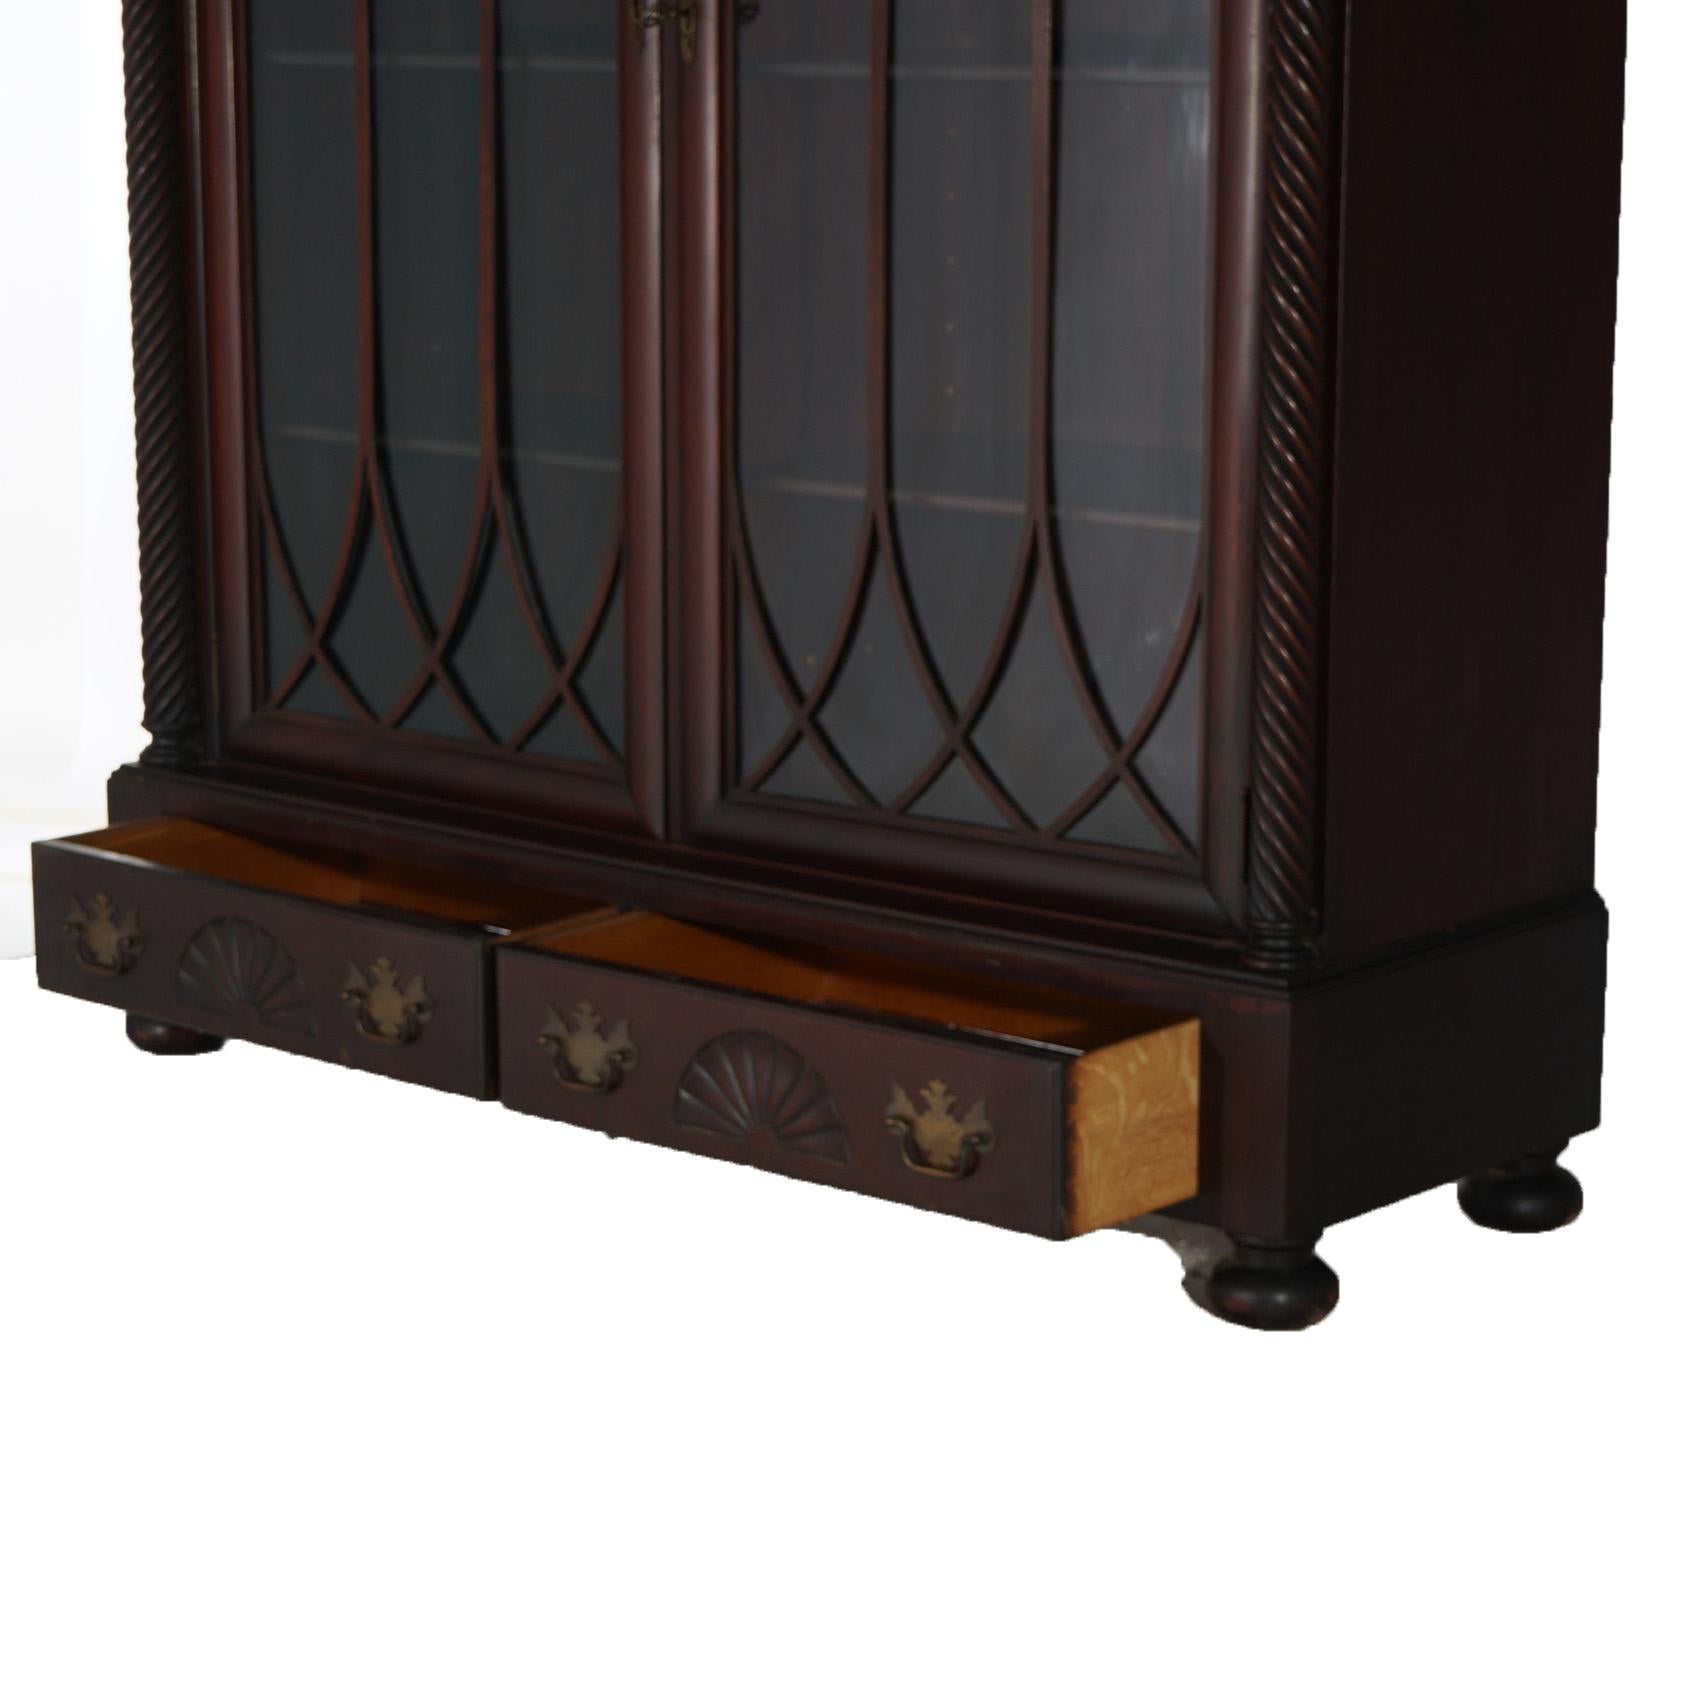 Antique American Empire Classical Carved Mahogany Double Door Bookcase c1890 For Sale 6